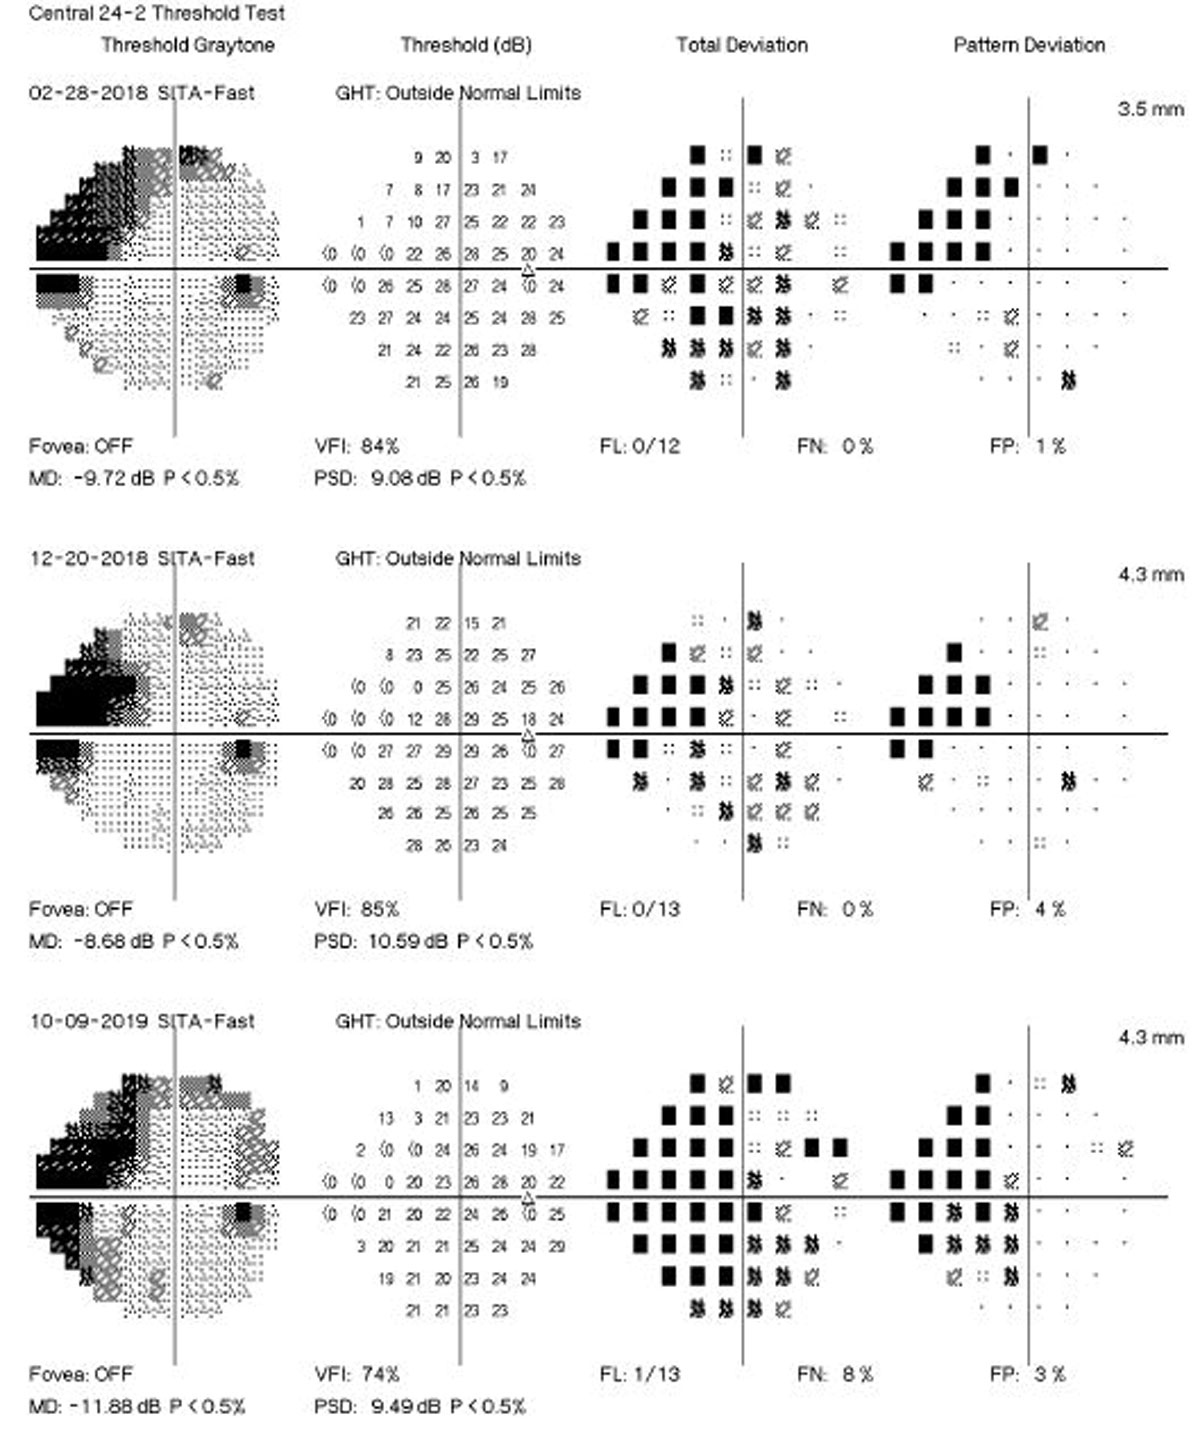 Visual field progression continued even with better medication adherence in this study.